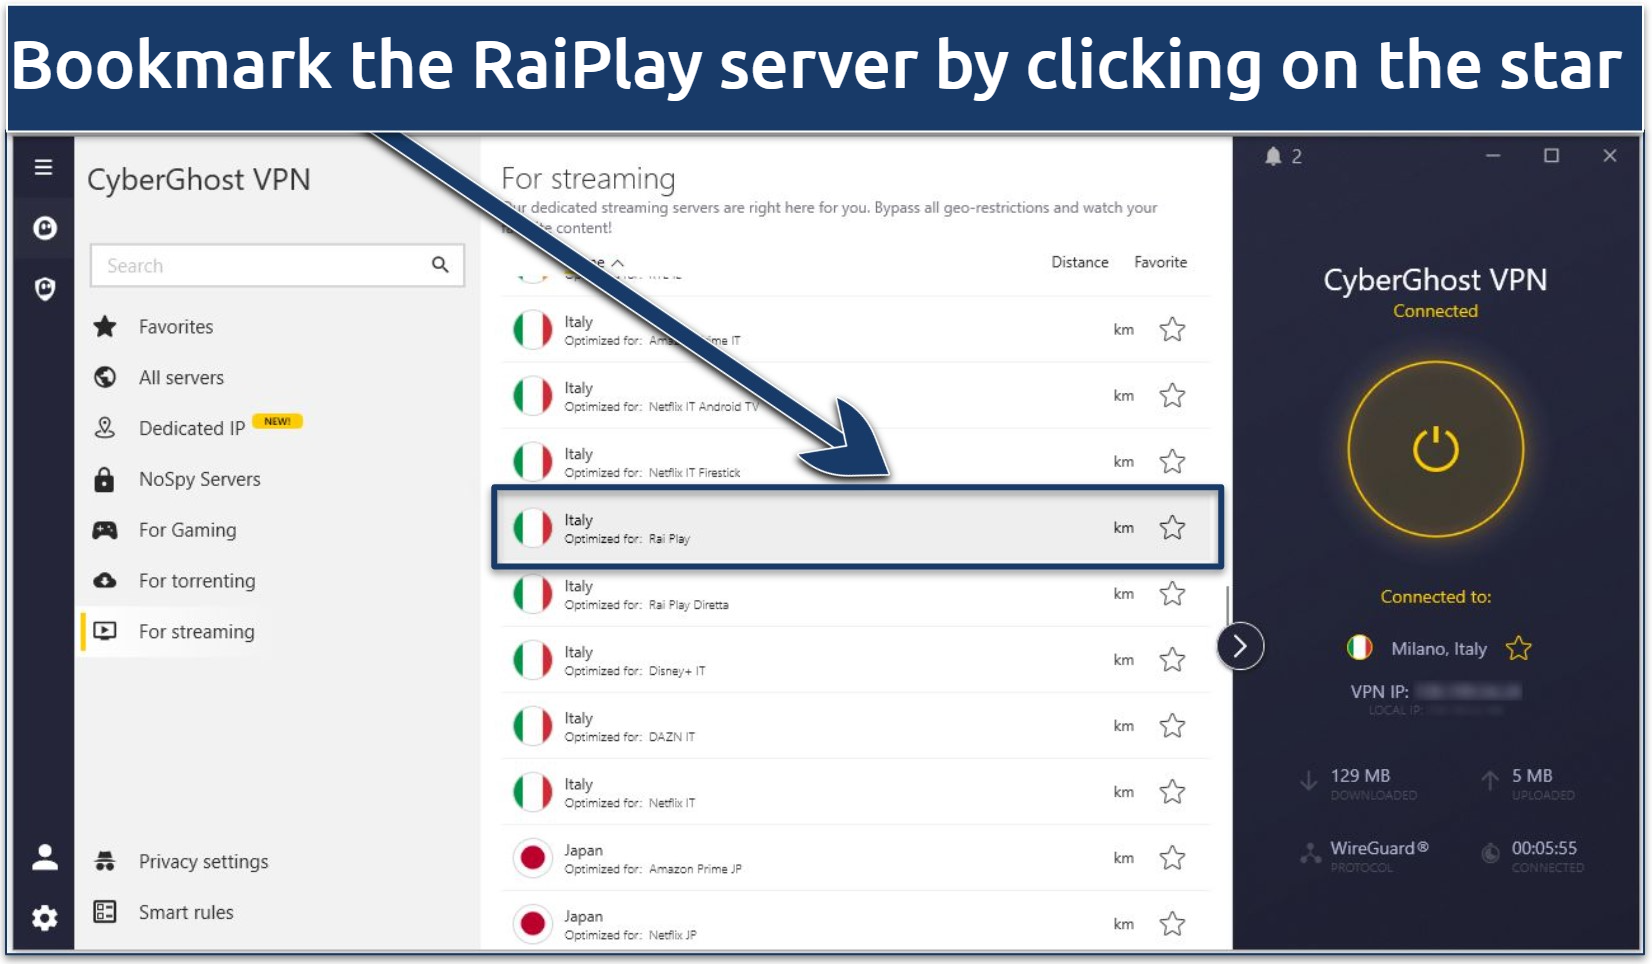 Screenshot of the CyberGhost app showing the RaiPlay-optimized server